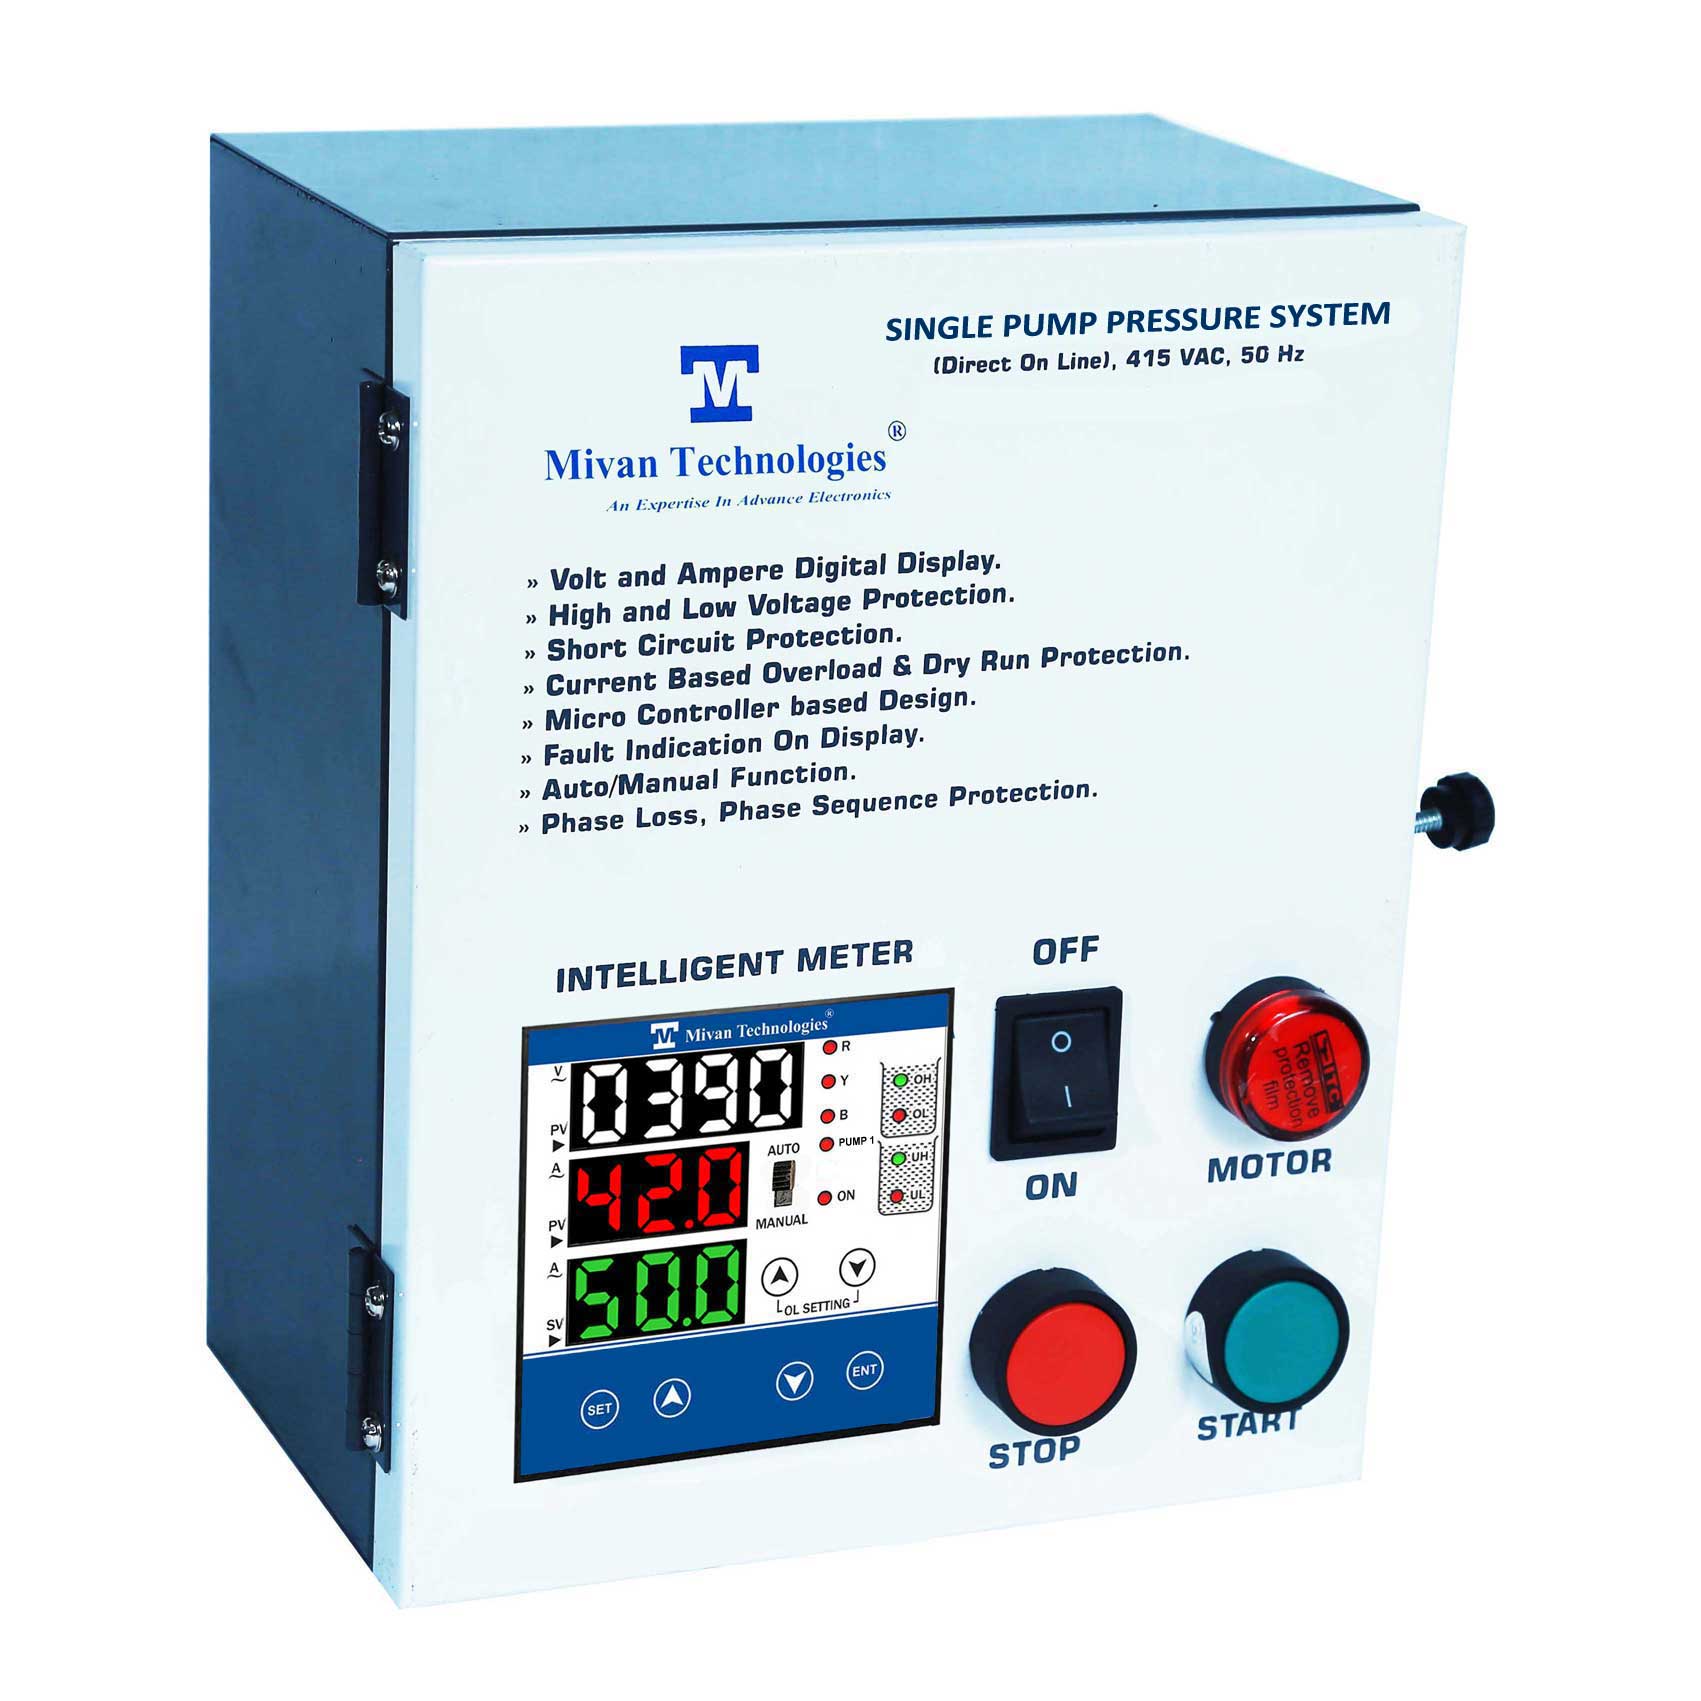 DOL SP 3 phase single pump pressure system with HV LV OL Dry protection with Auto switch spp and timer suitable up to 10 hp motor